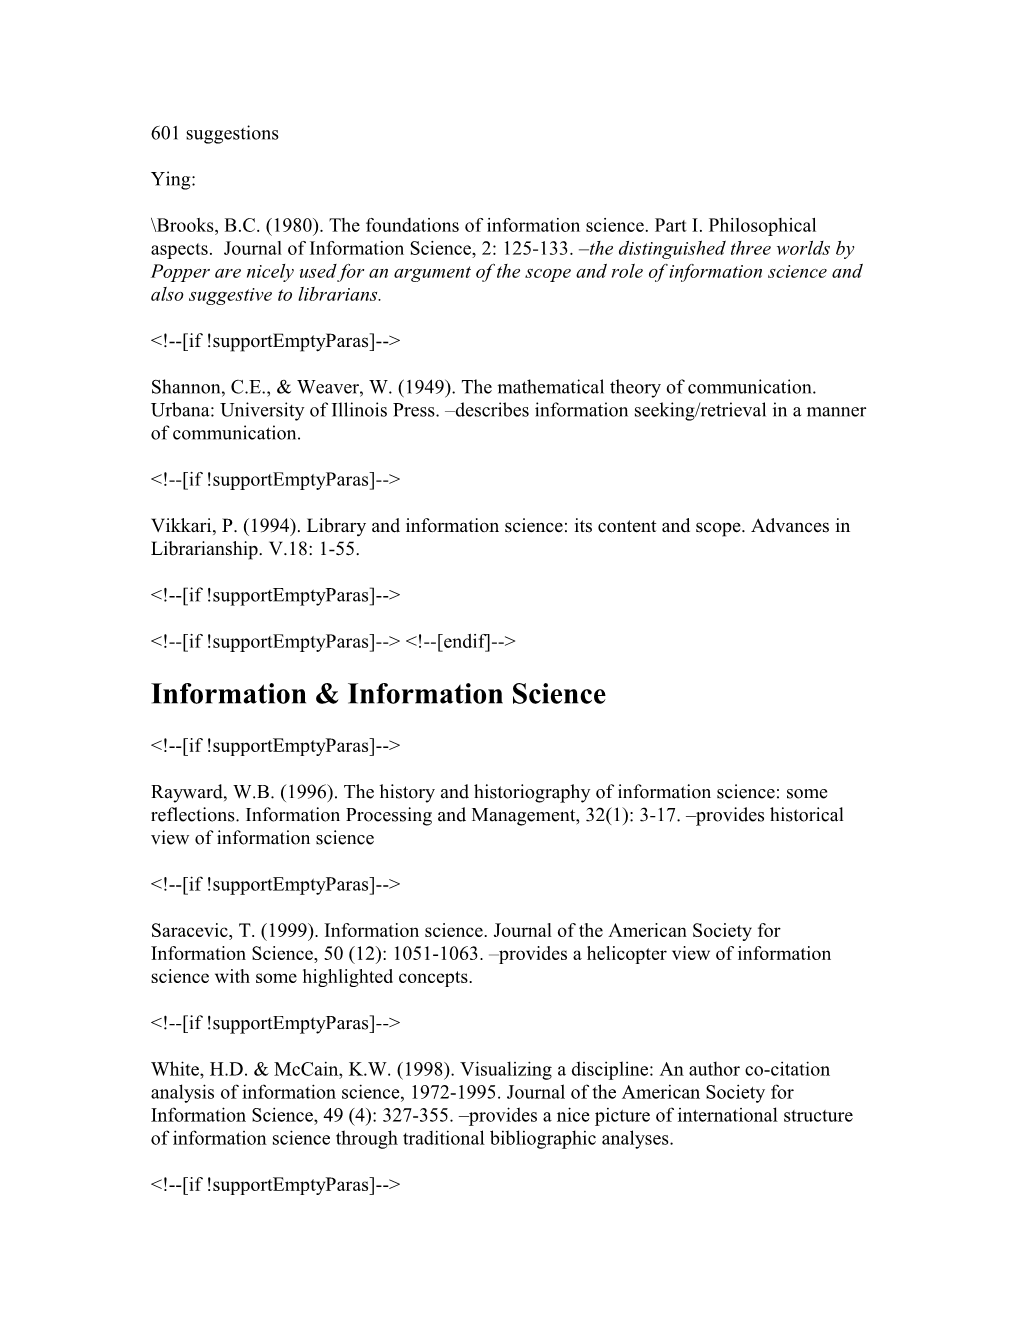 Vikkari, P. (1994). Library and Information Science: Its Content and Scope. Advances In